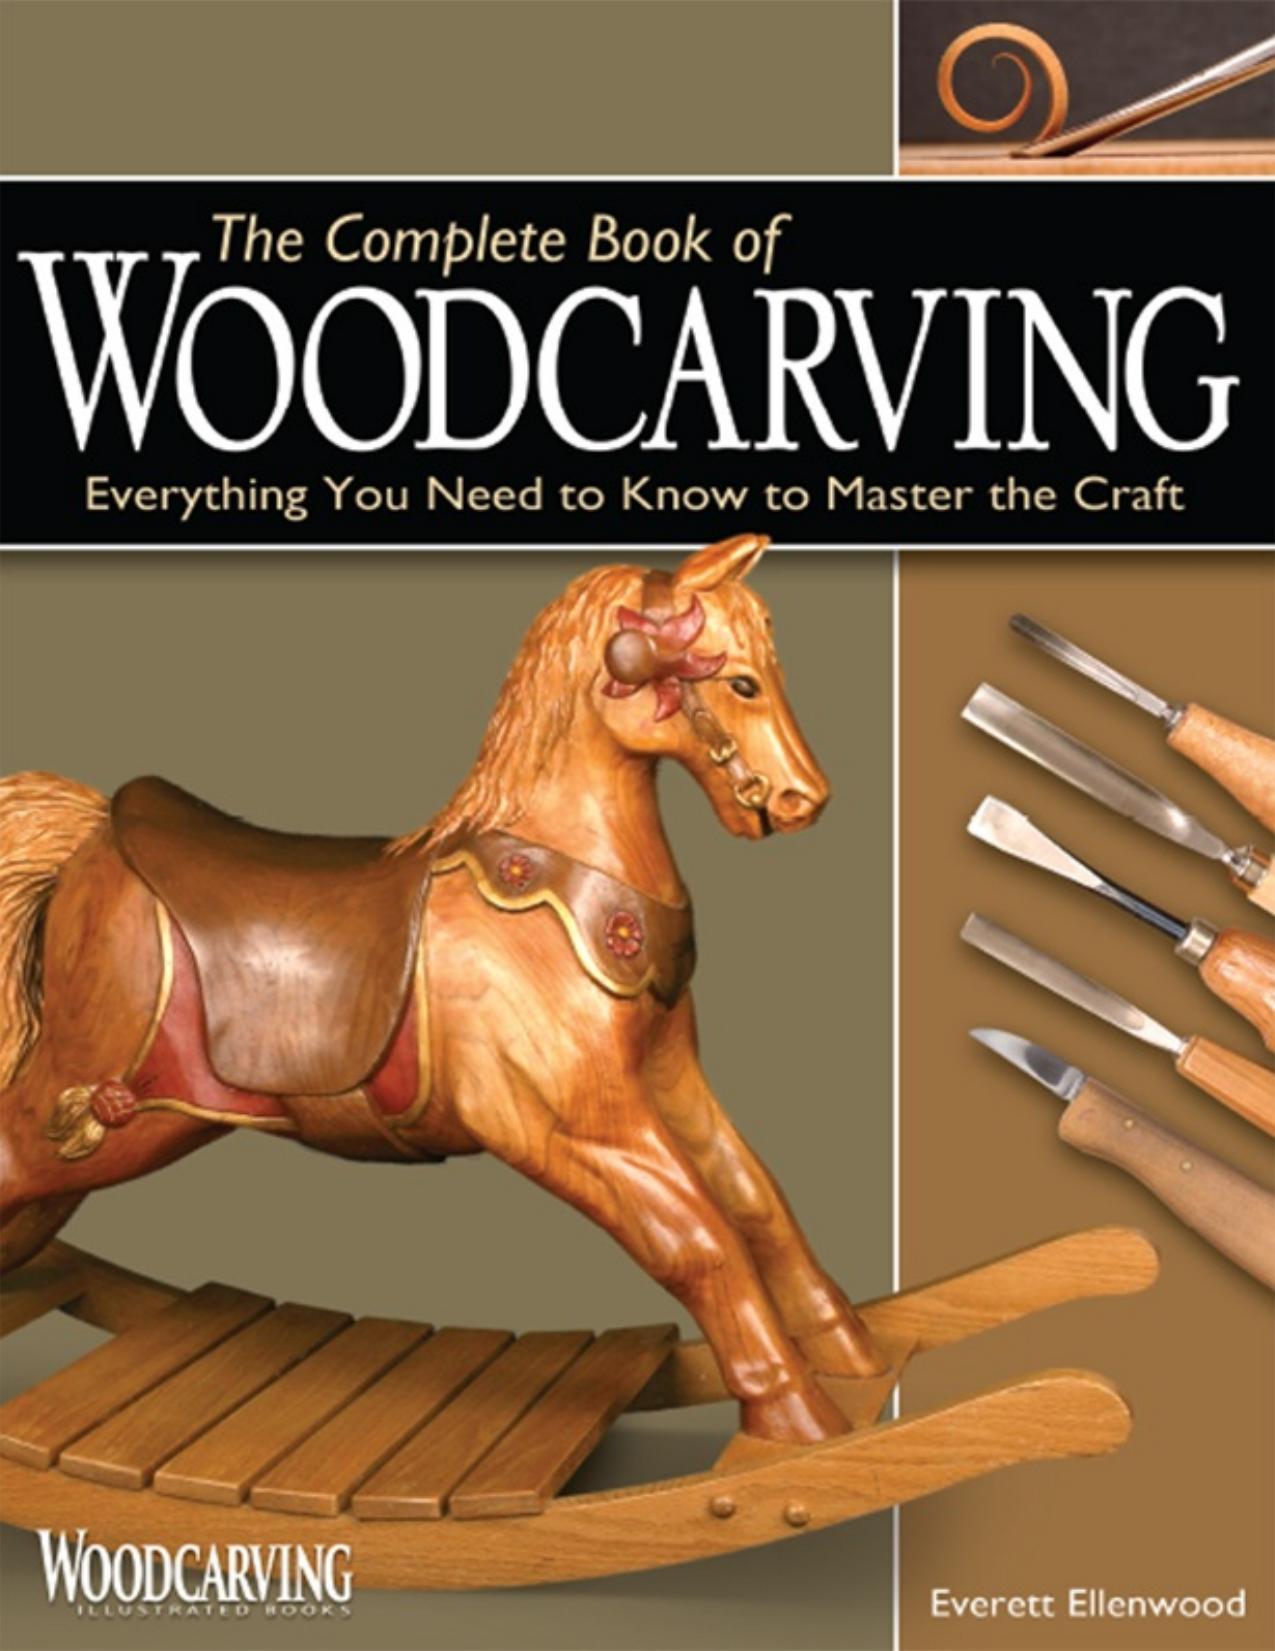 The Complete Book of Woodcarving by Everett Ellenwood